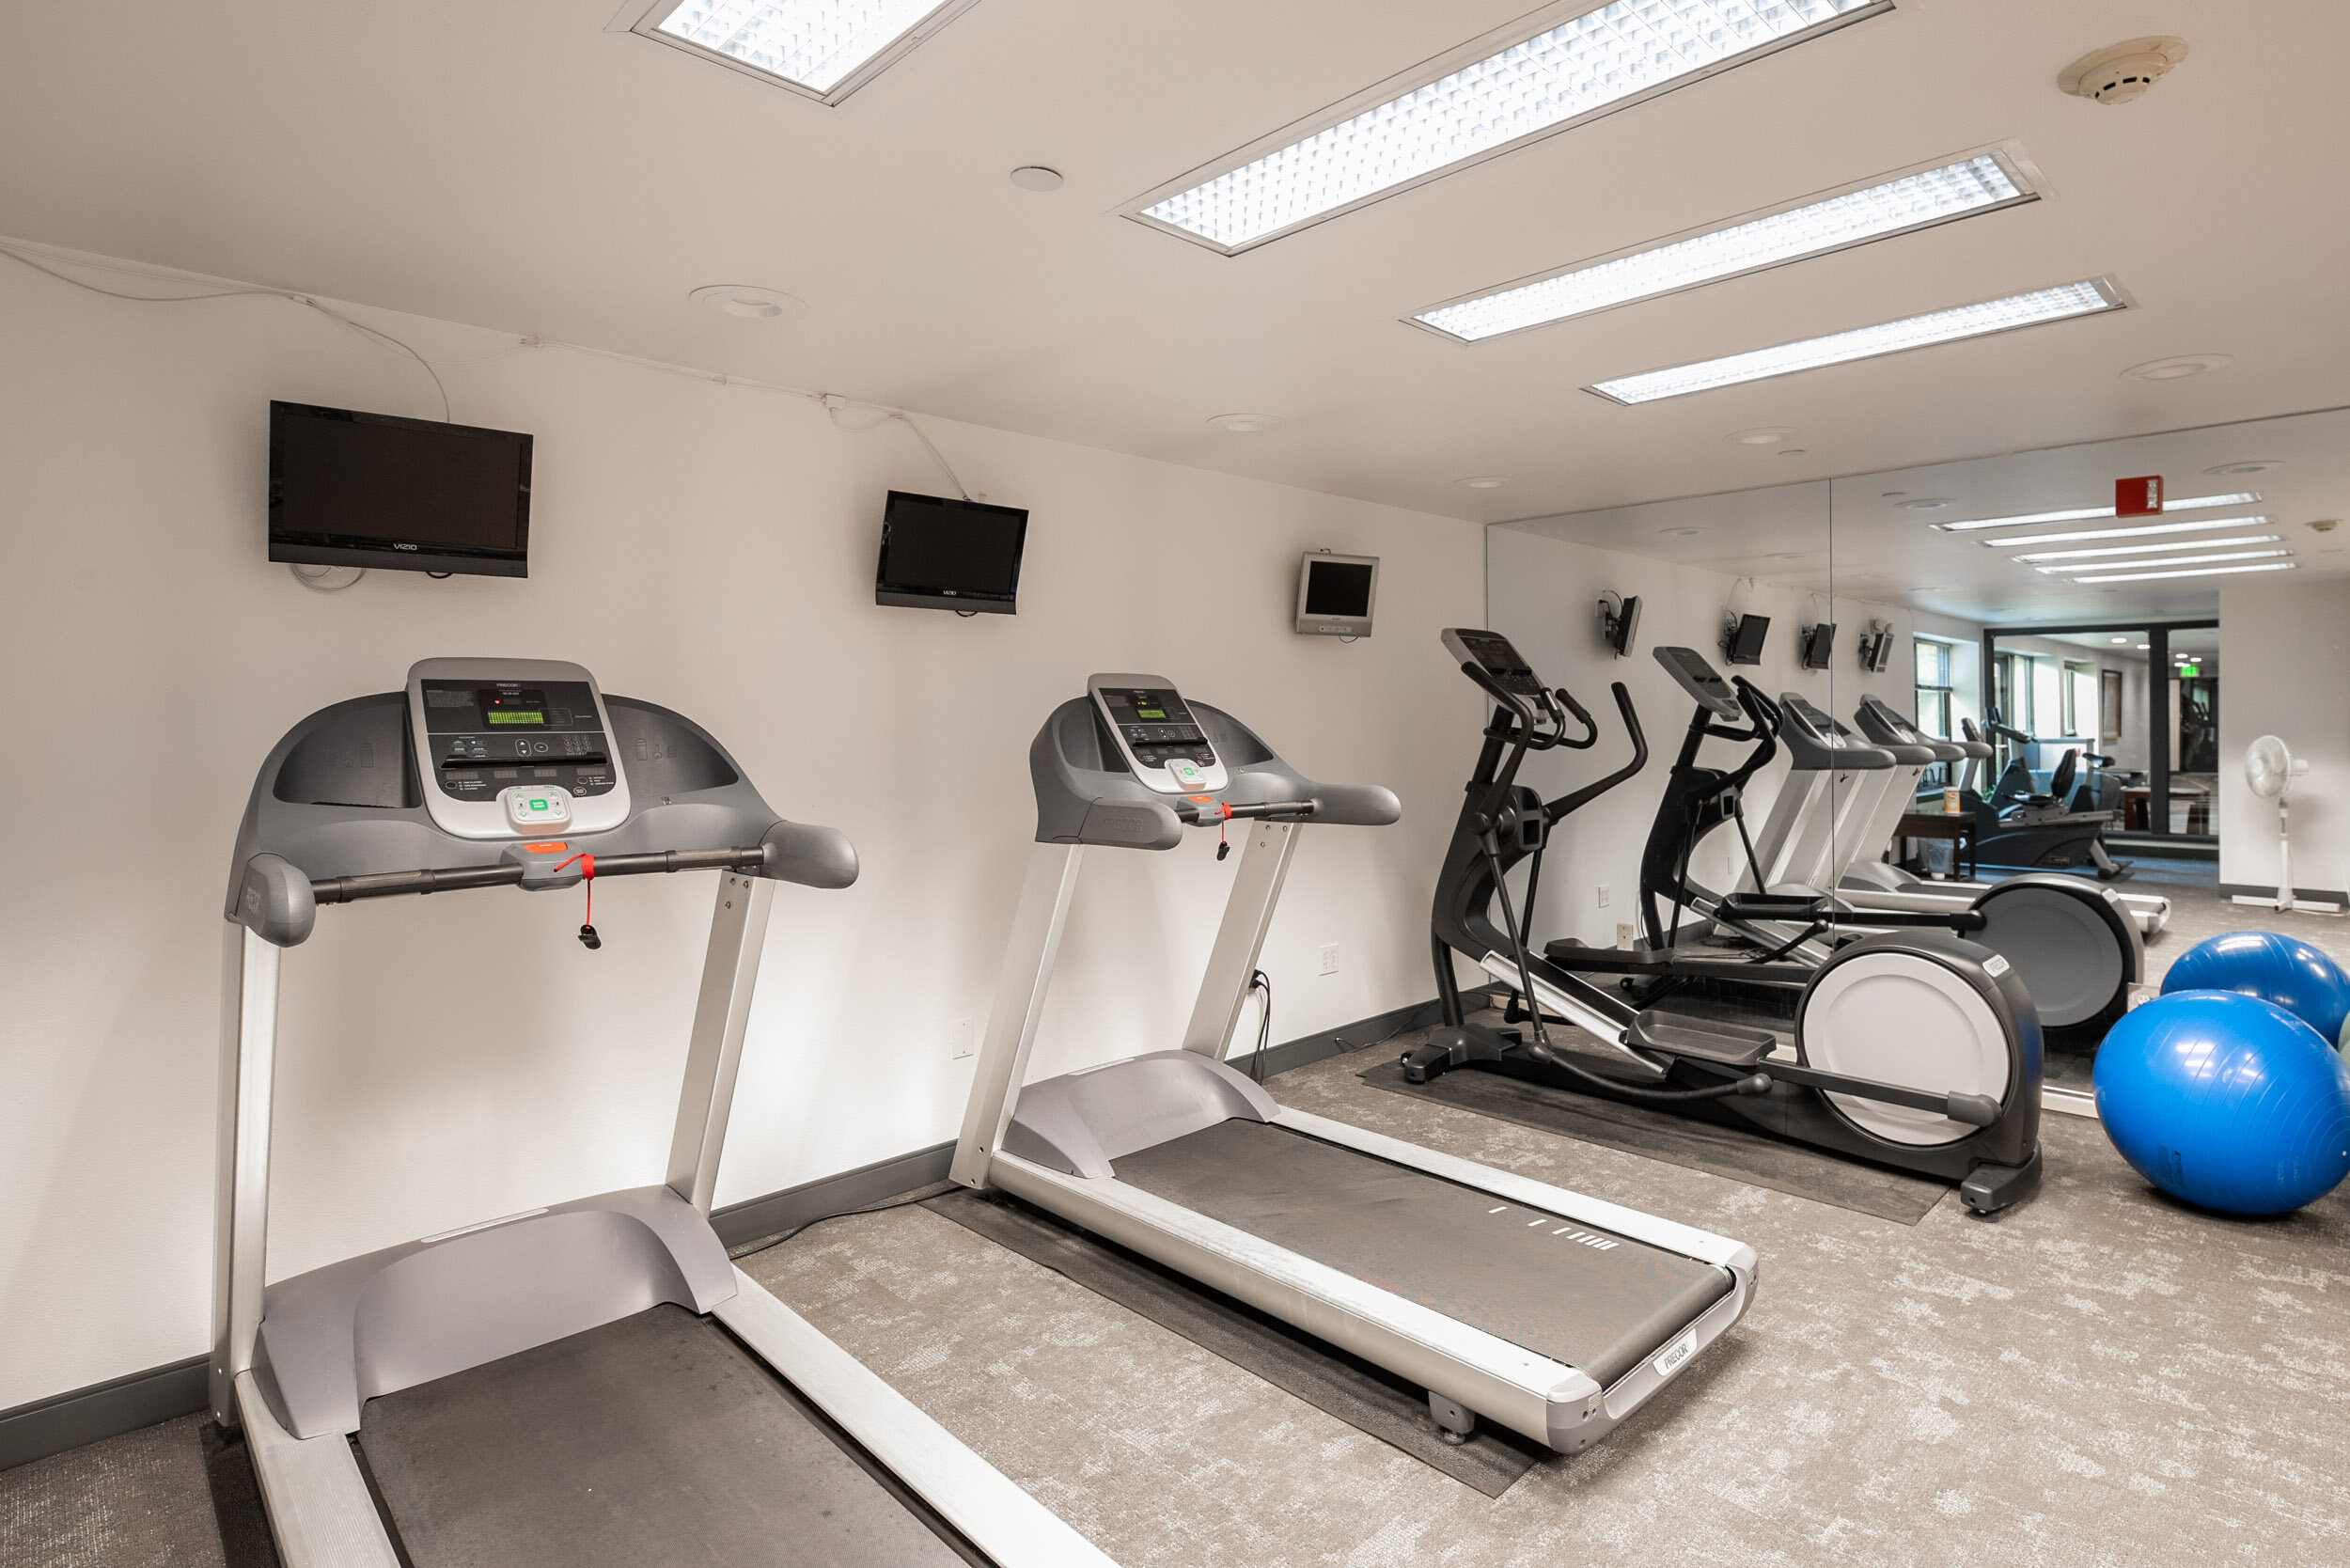  The condo has many amenities including a gym/workout room. 